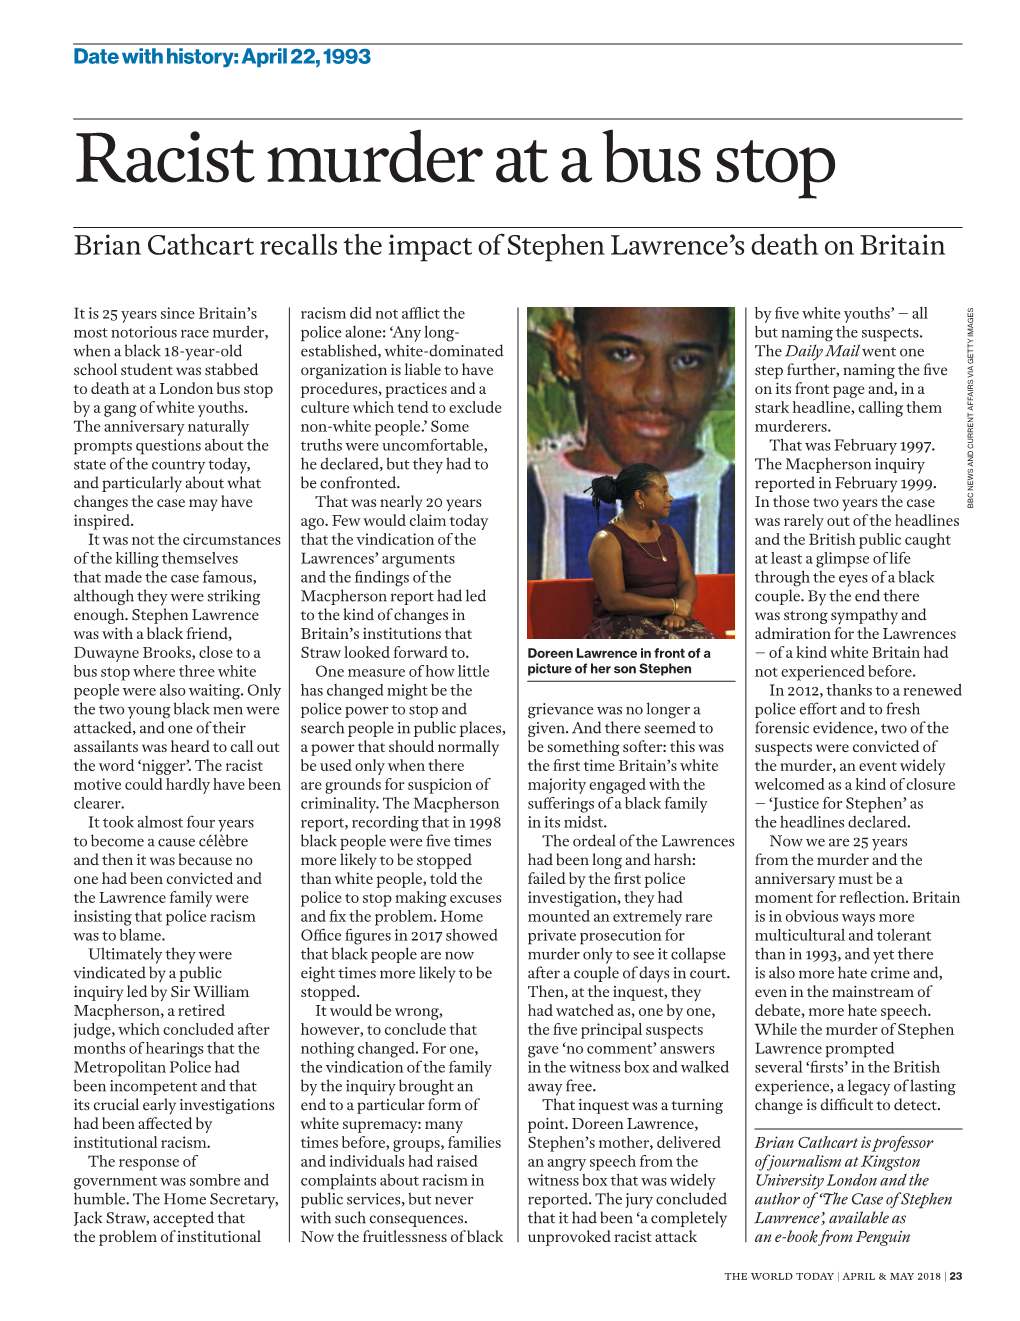 Racist Murder at a Bus Stop